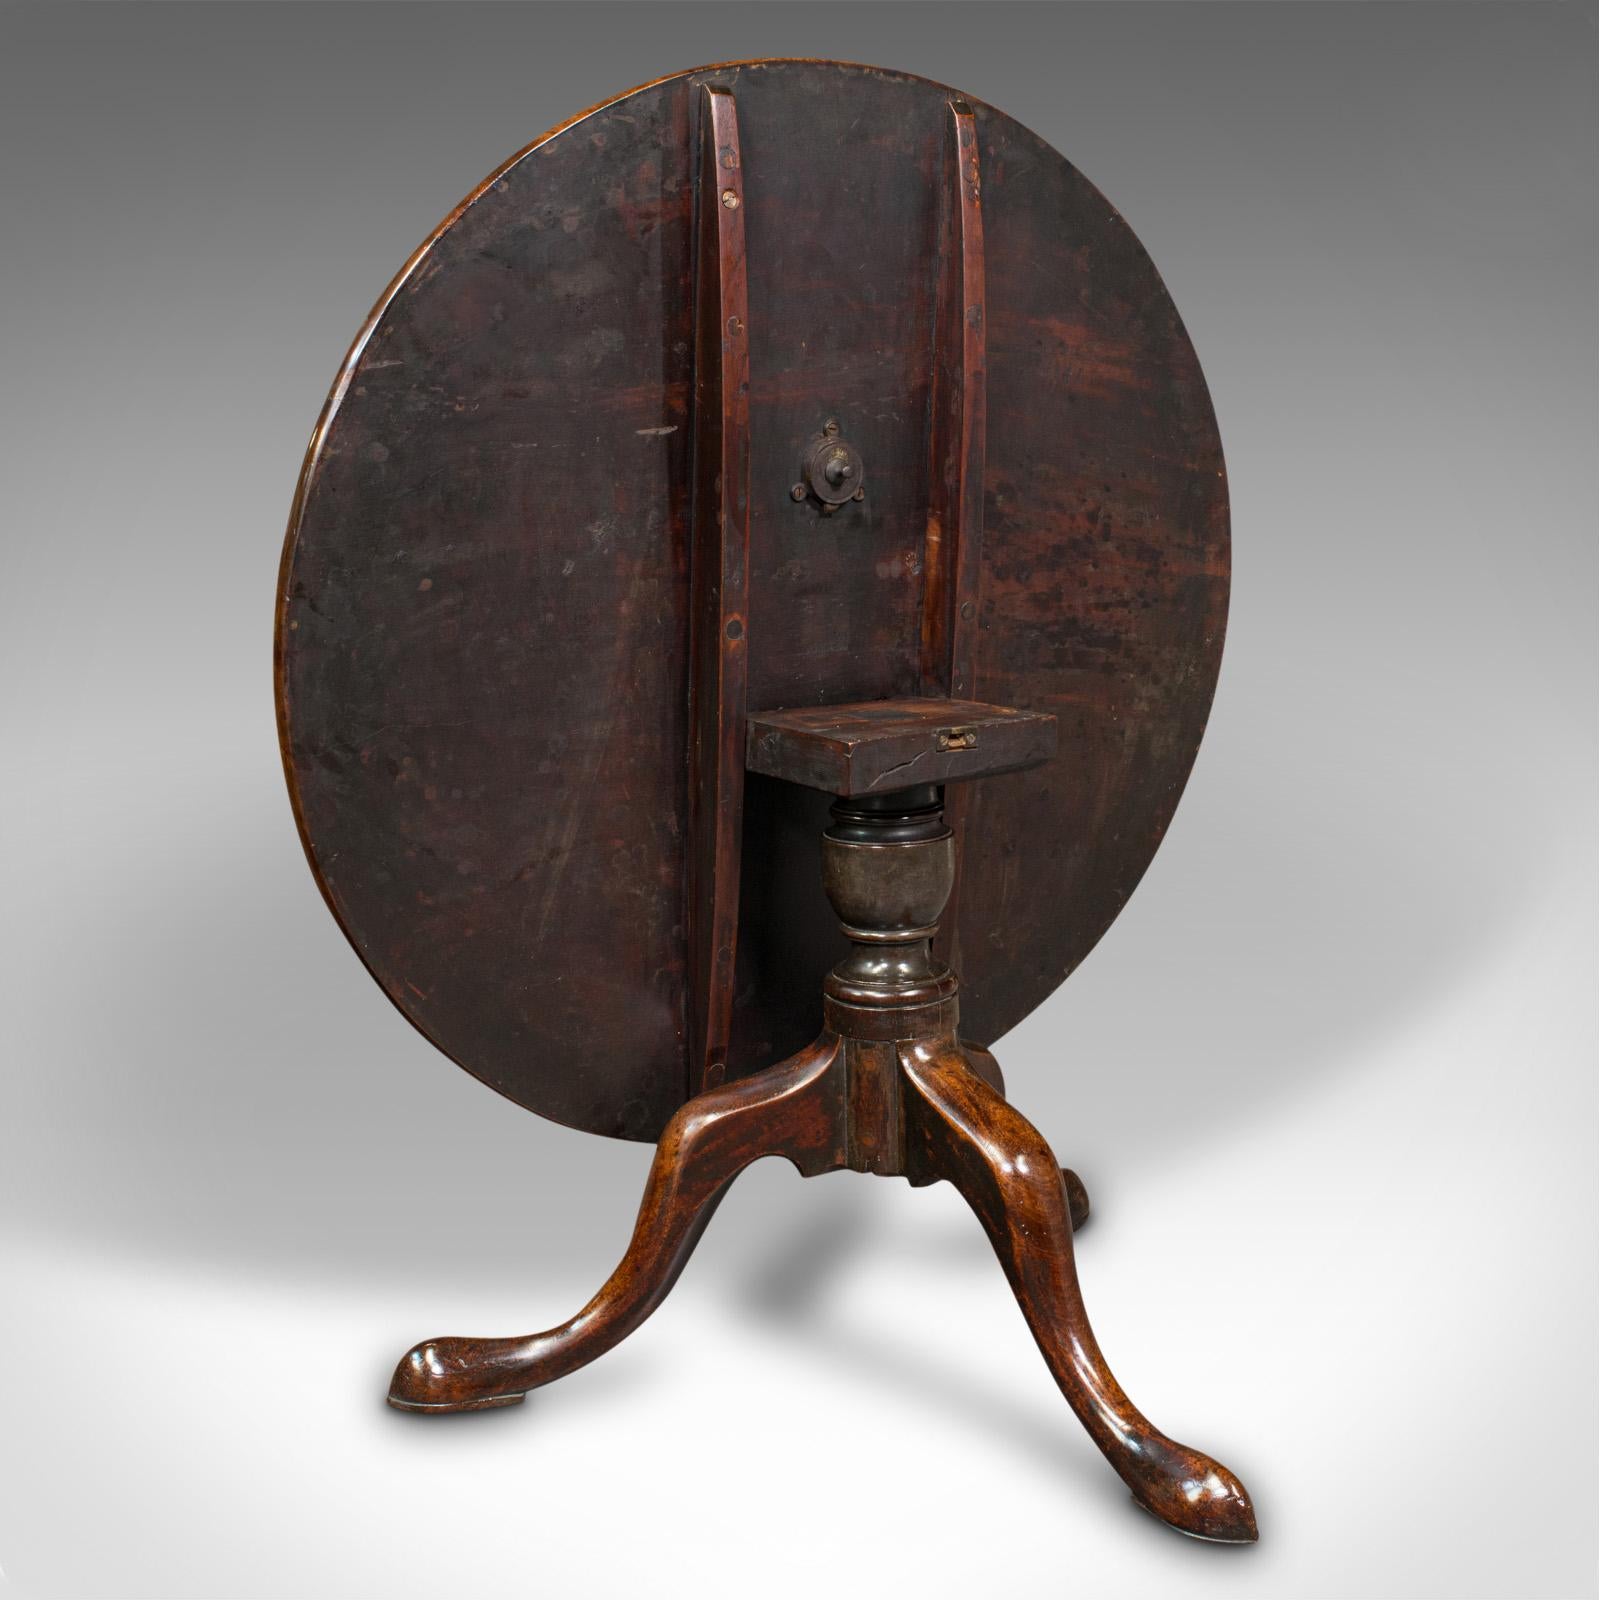 Antique Tilt Top Table, English, Wine, Afternoon Tea, Early Georgian, Circa 1750 For Sale 2